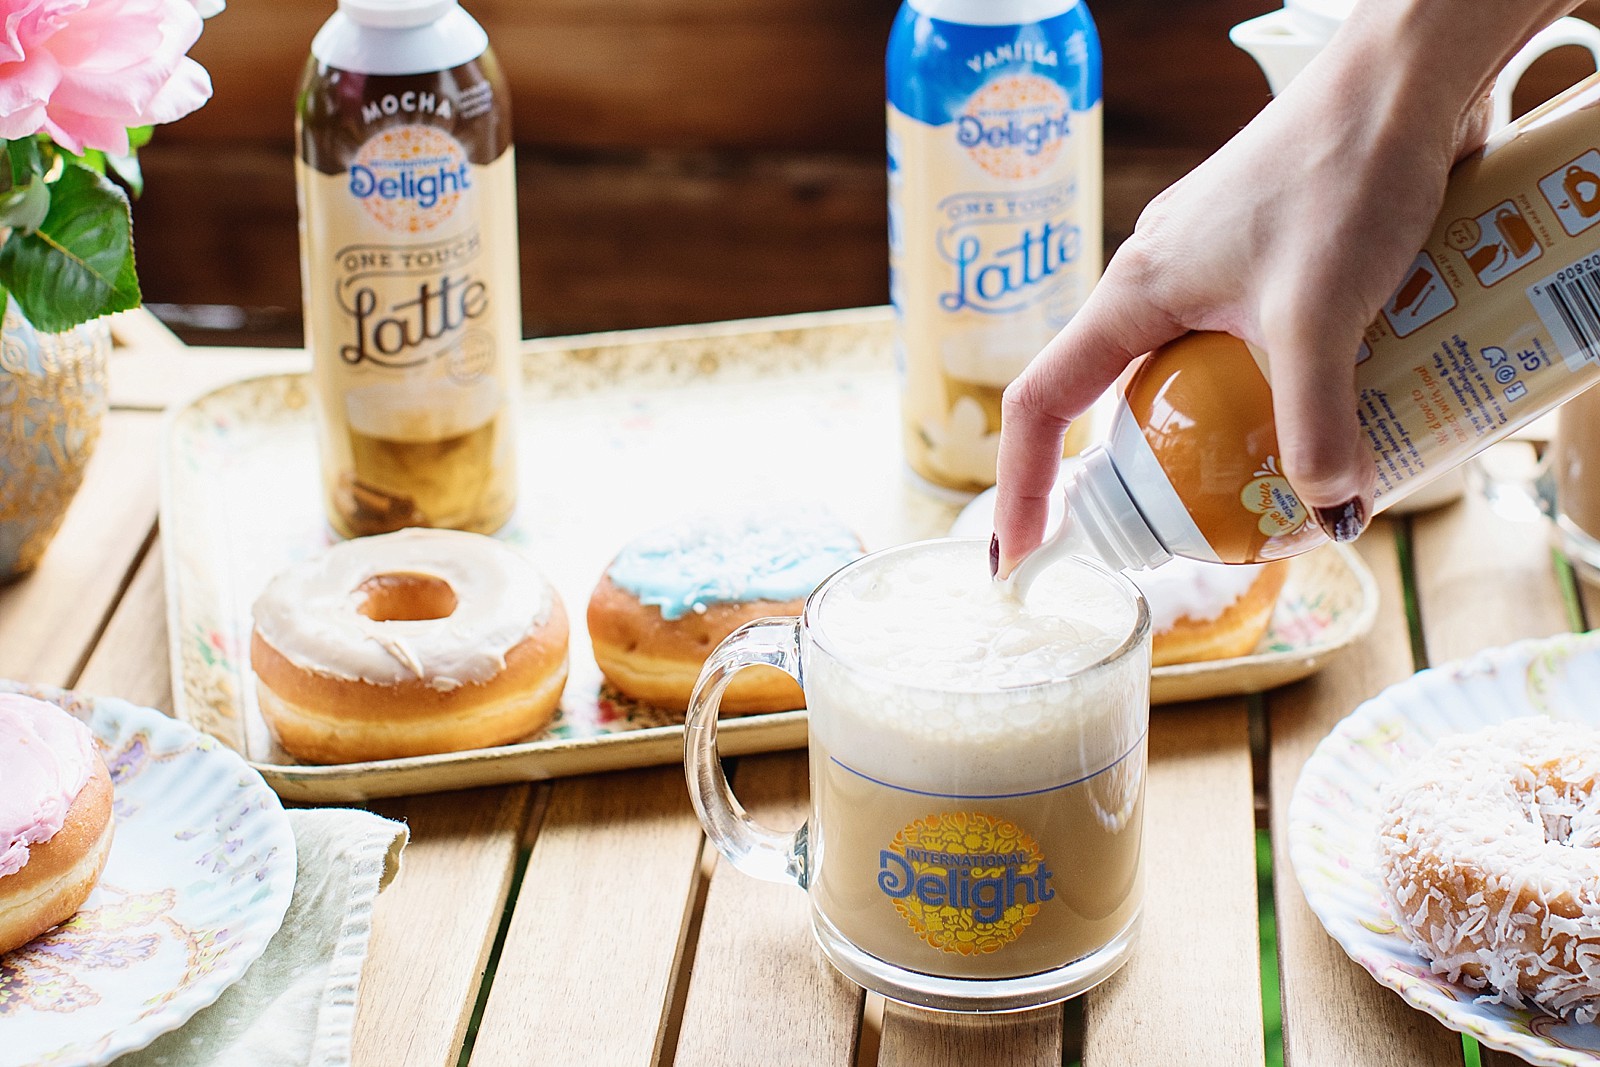 TARGET: International Delight Simply Pure Creamer Just 70¢ and One Touch Latte Only $1.06!